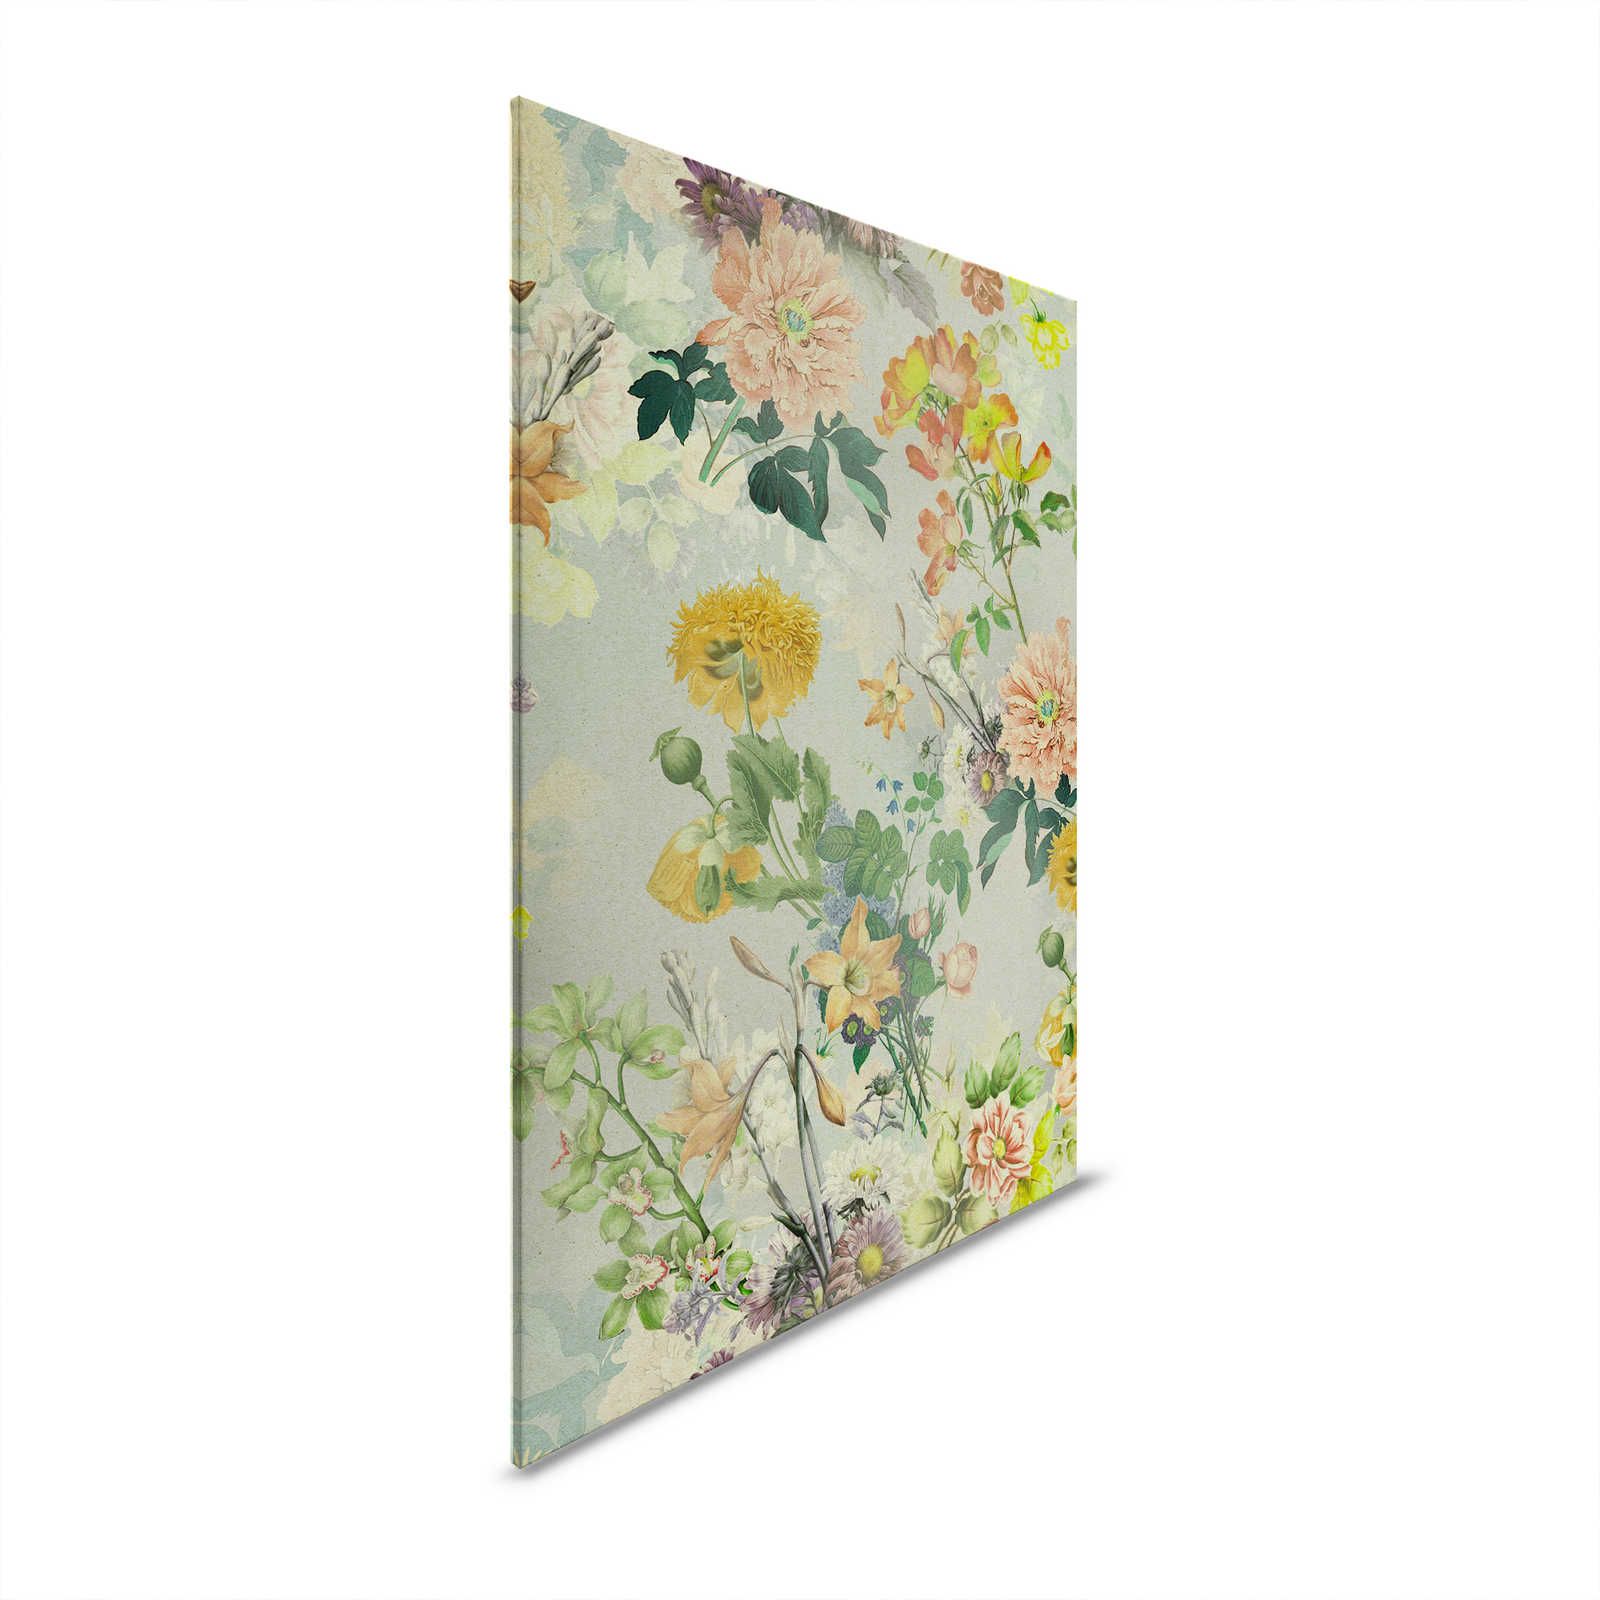         Amelies Home 2 - Flowers Canvas painting colourful flowers in country style - 0,90 m x 0,60 m
    